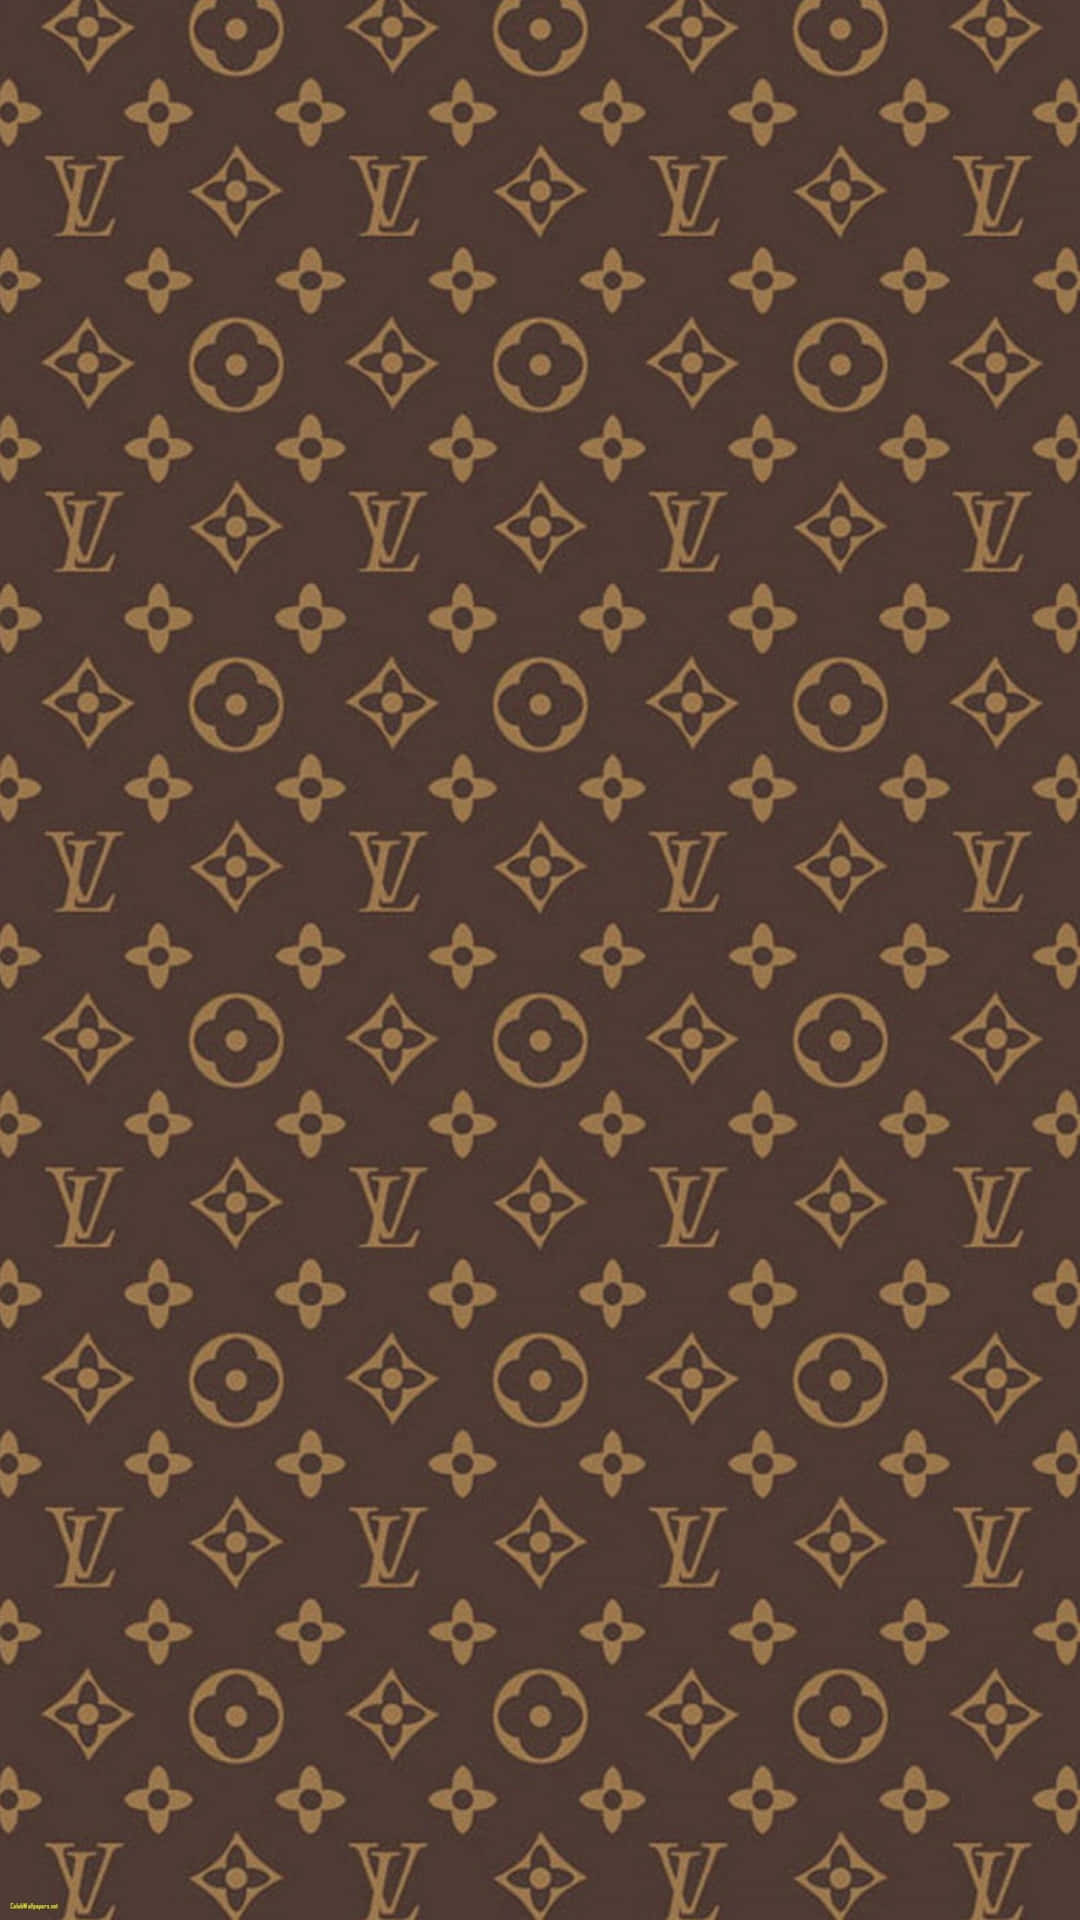 Dykkned I Louis Vuittons Cool Vibe. Wallpaper